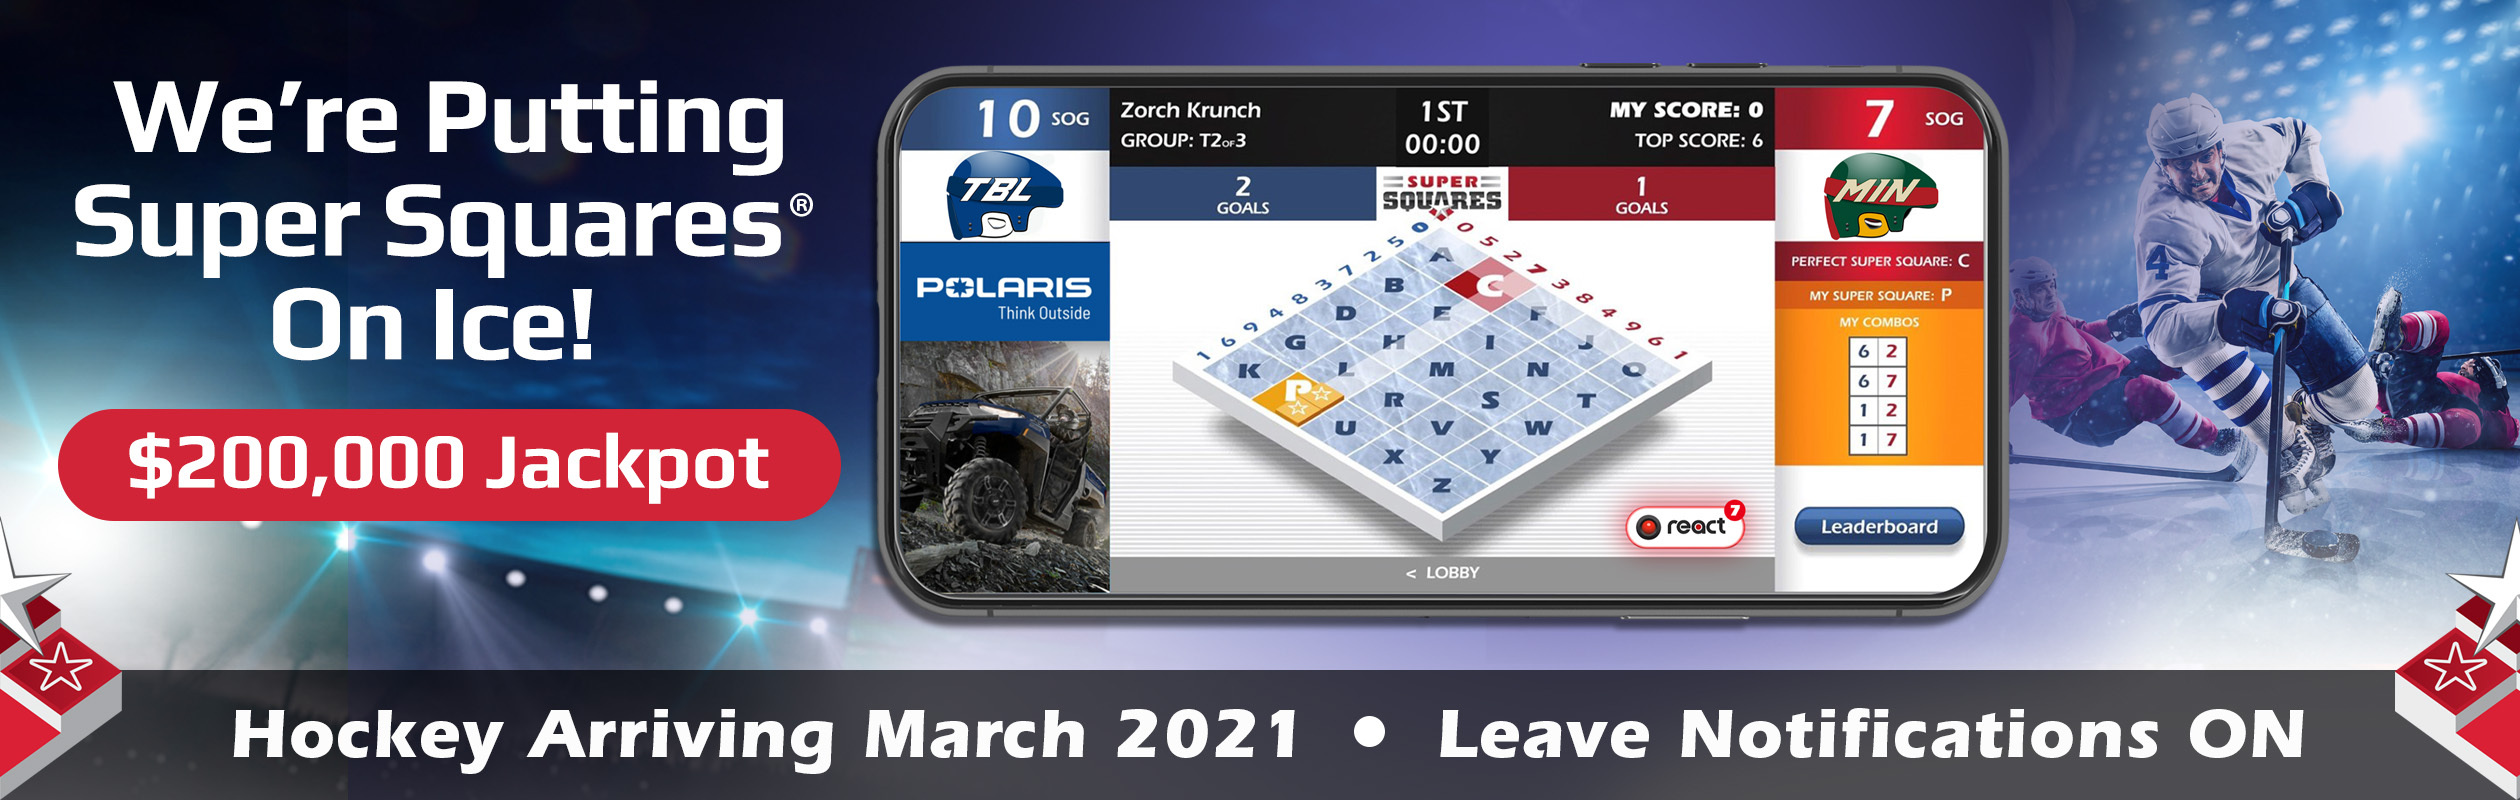 Super Squares® Takes Sports Prediction and Squares to a New Level